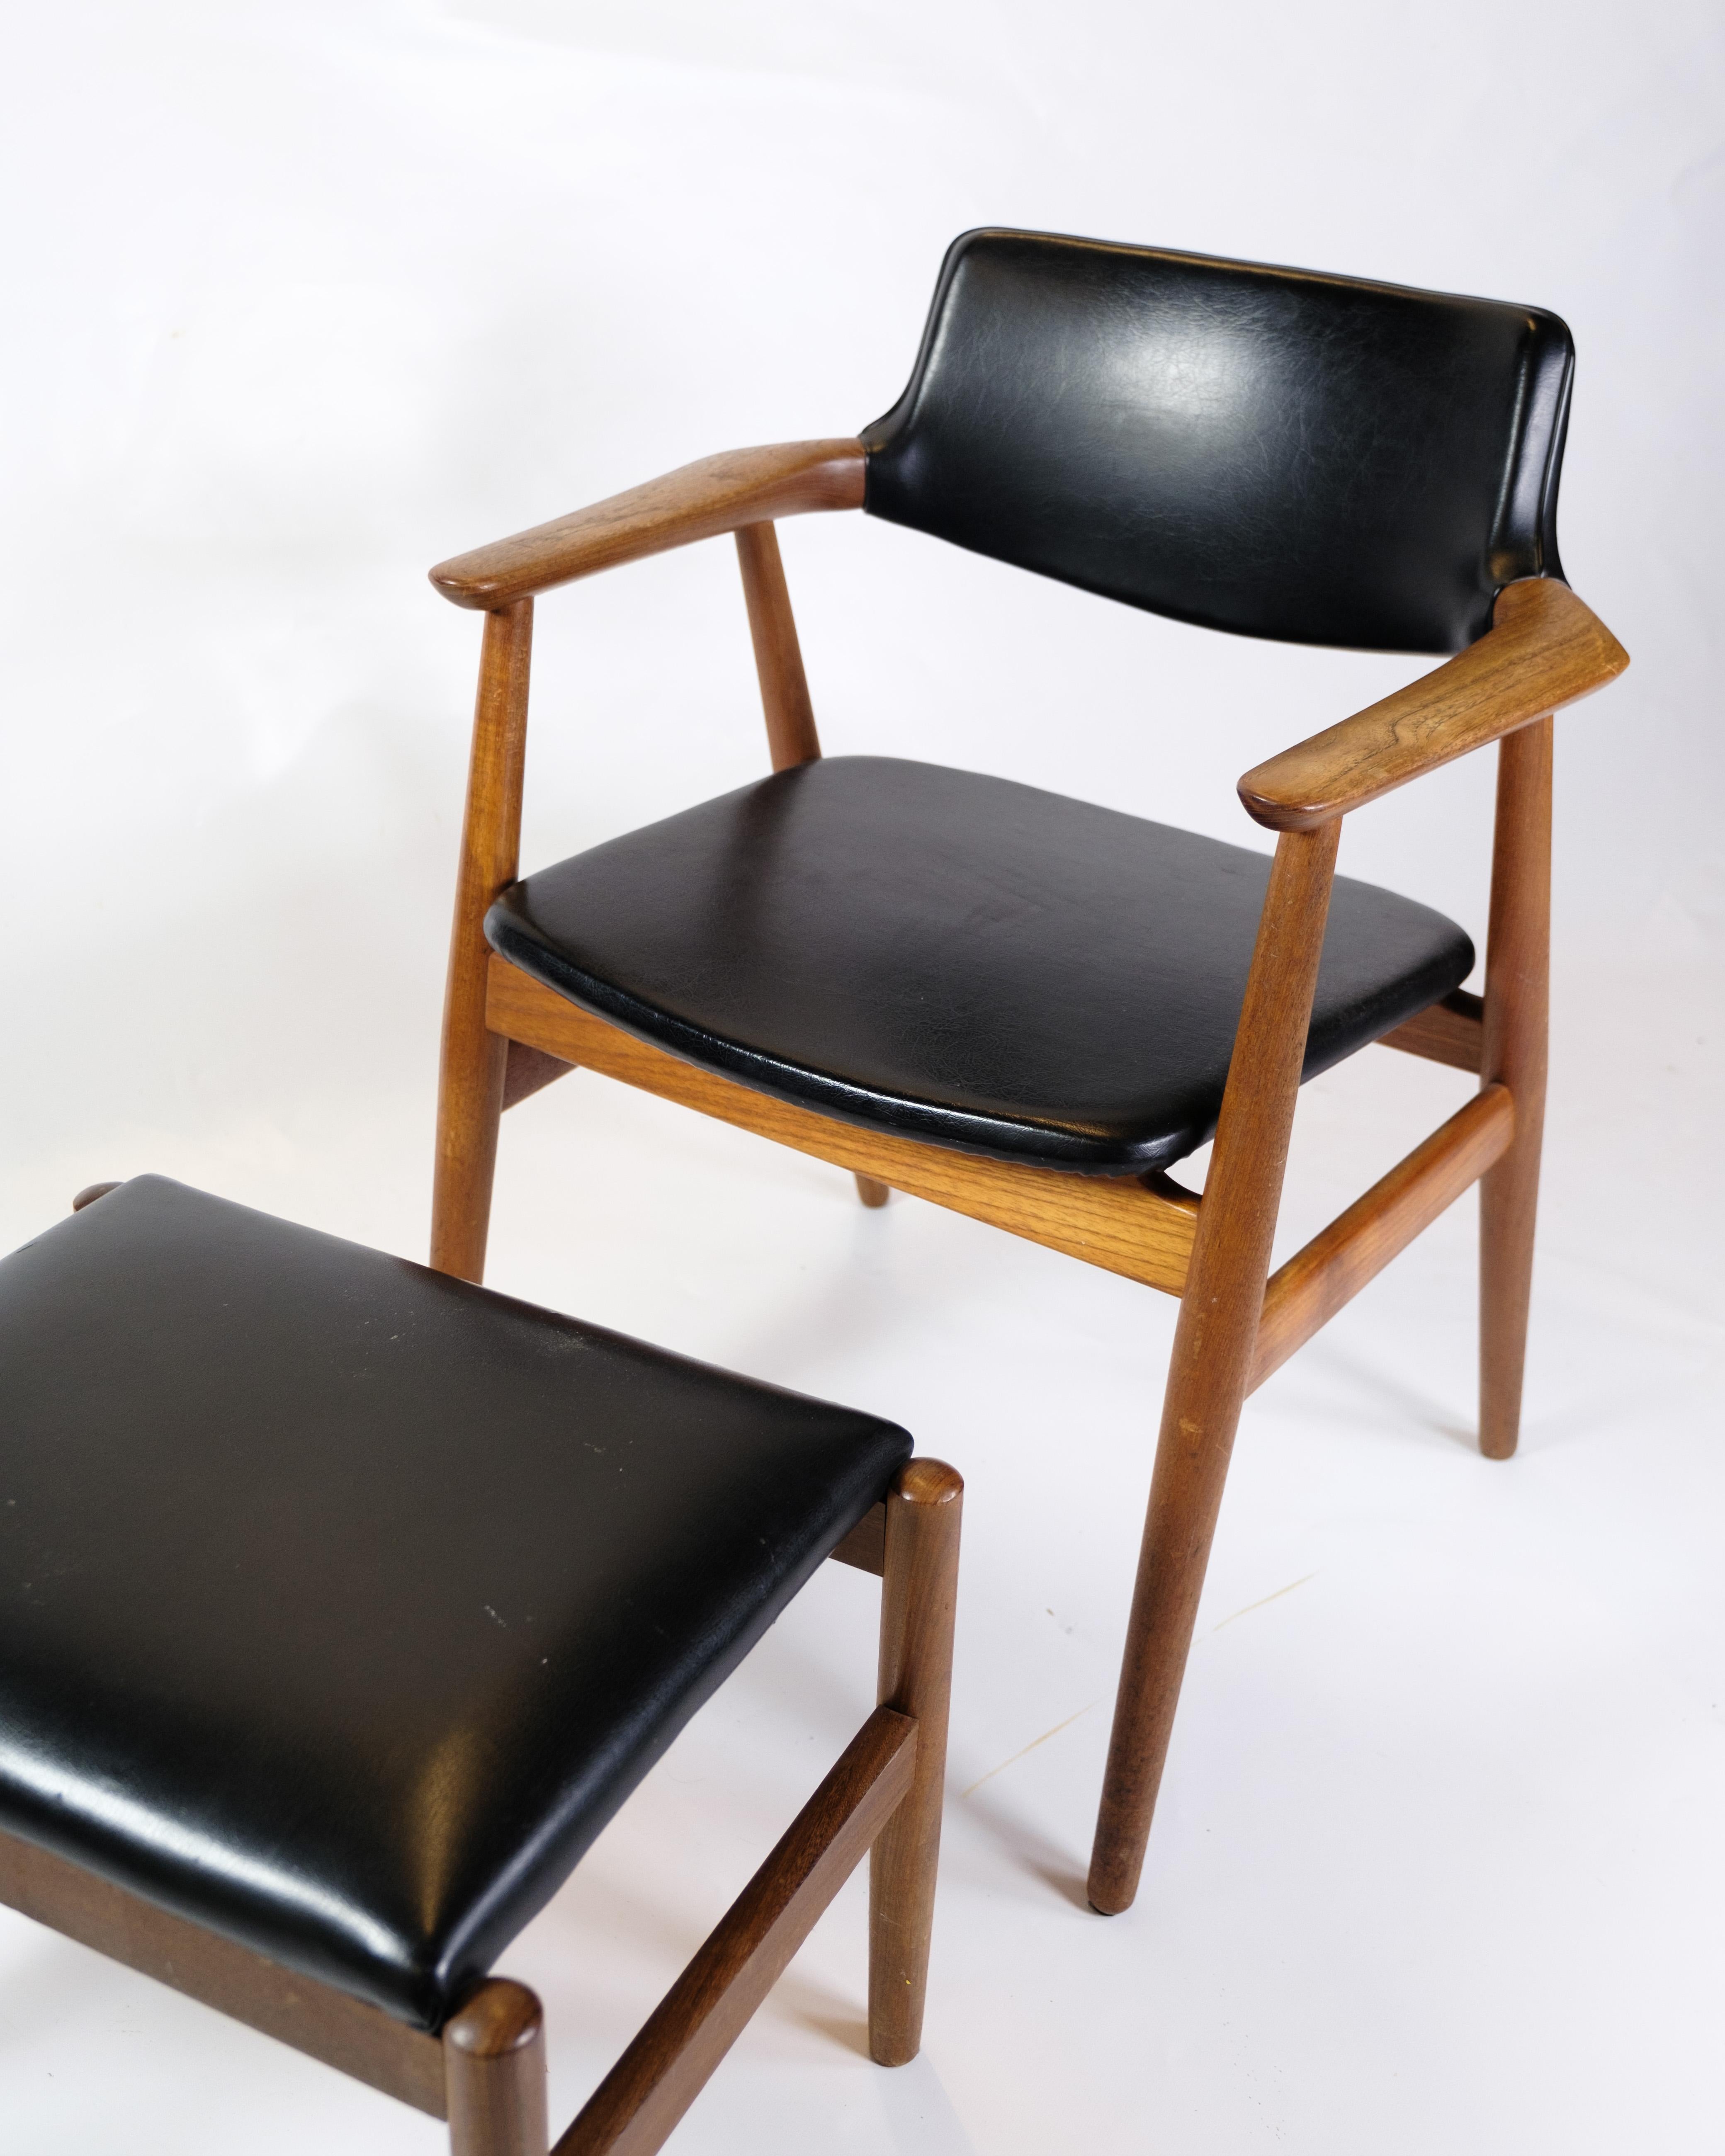 This set of an armchair and a stool, consisting of the GM11 chair designed by Svend Erik Andersen and manufactured by Glostrup Møbelfabrik in the 1960s, is a beautiful example of mid-20th century Danish furniture design.

Both comfortable and